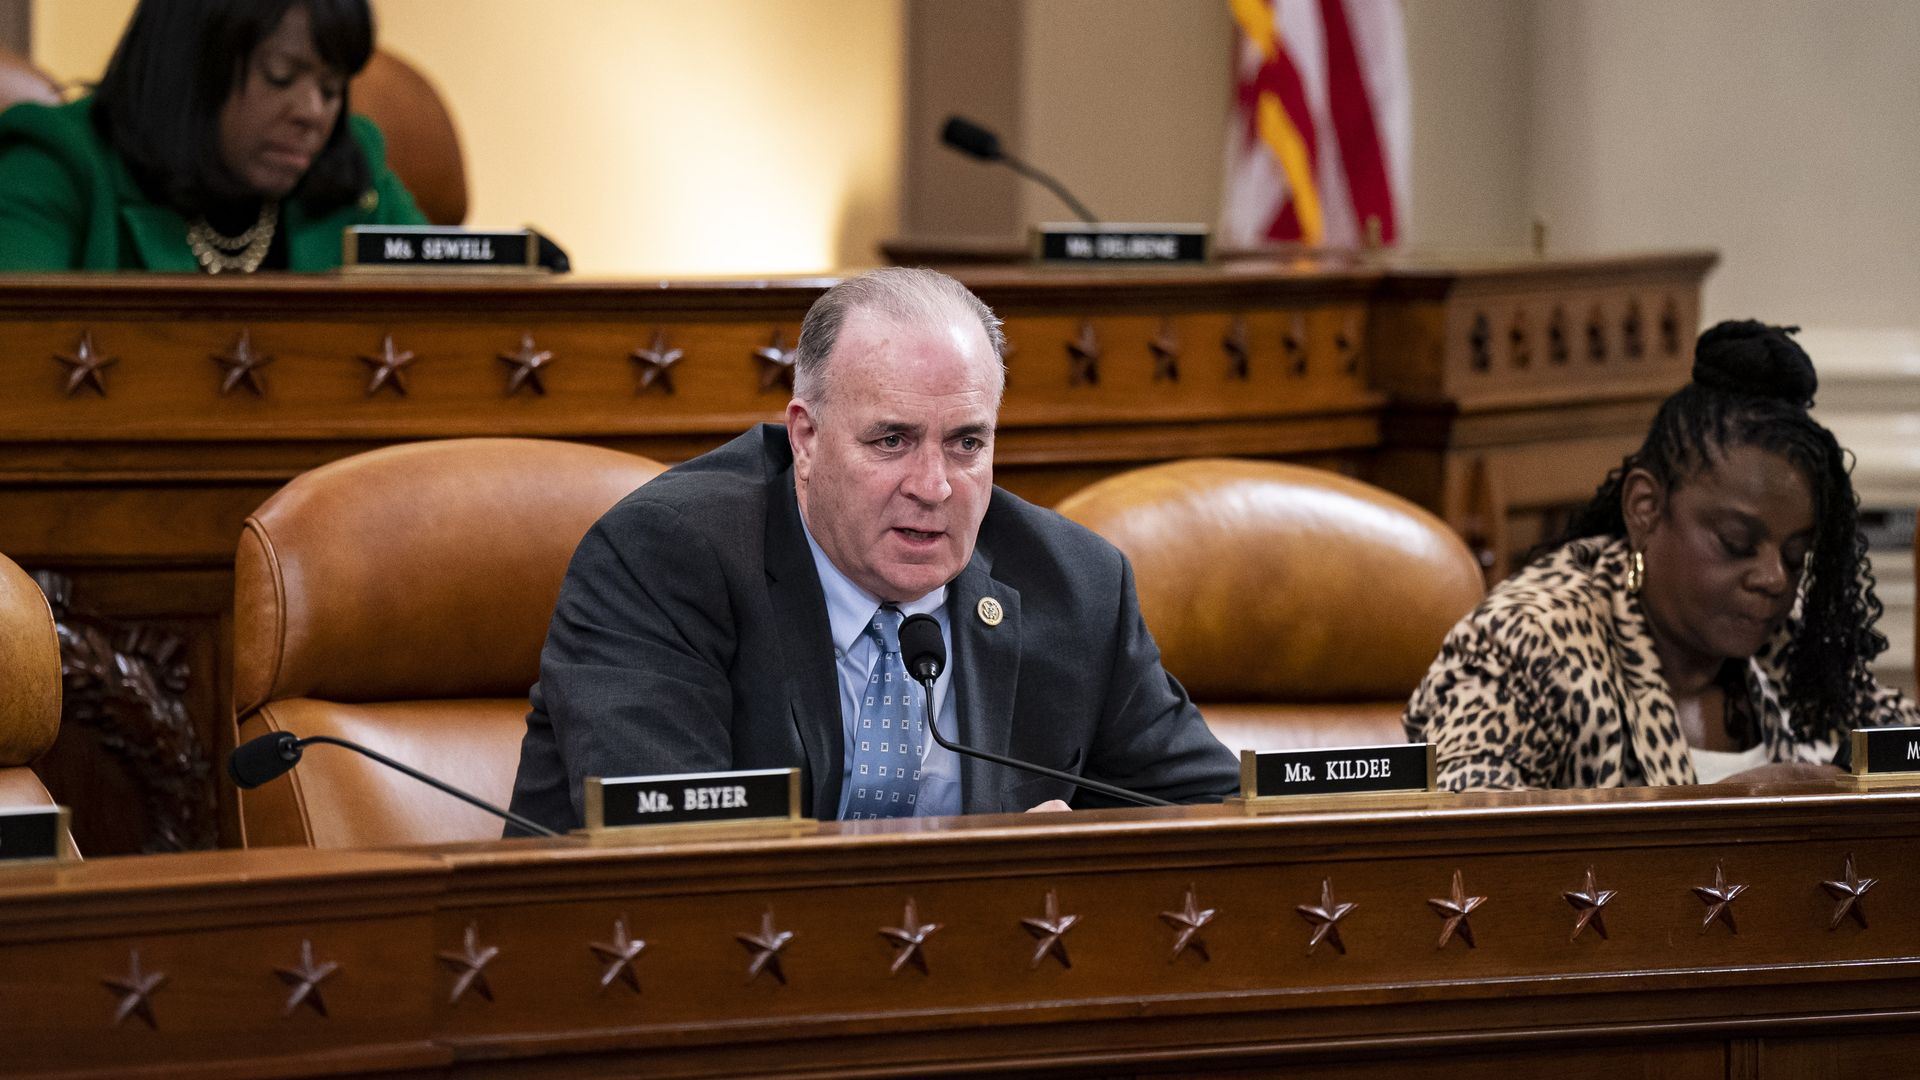 Rep. Dan Kildee, wearing a grey suit, blue shirt and blue tie, speaks into a microphone while sitting behind the dais at a committee hearing.